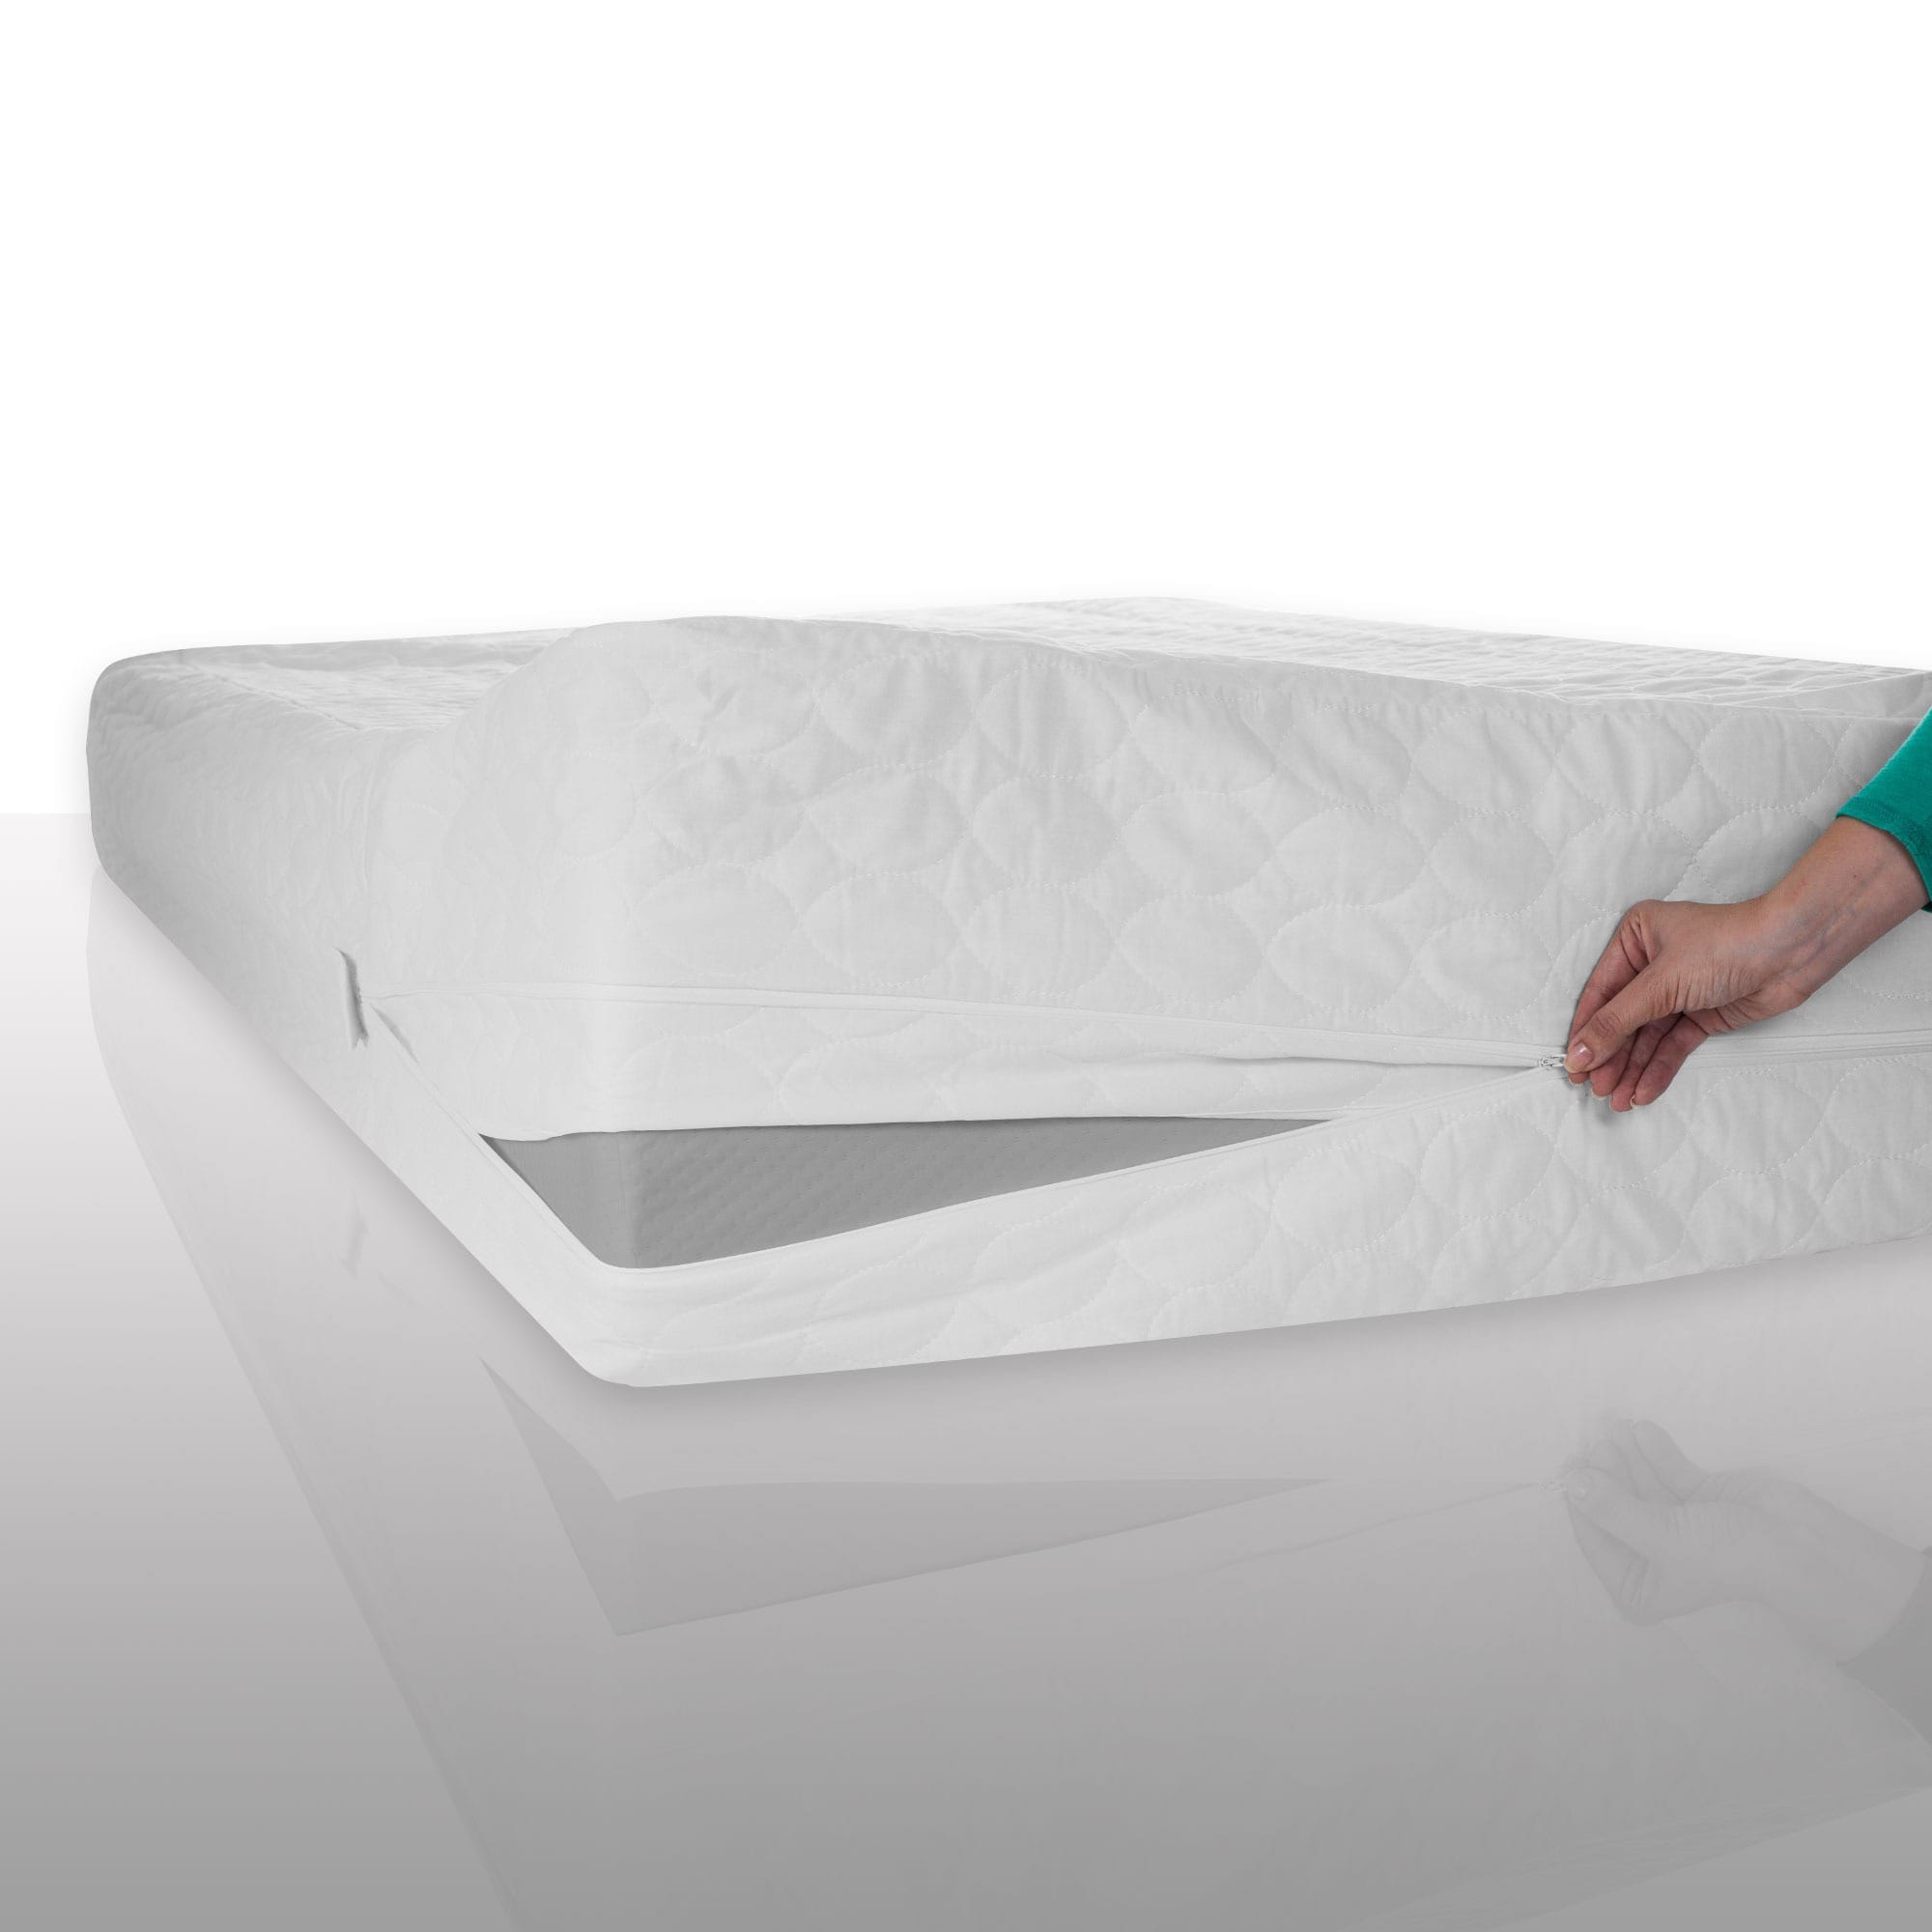 Remedy Waterproof Bed Bug Mattress Cover